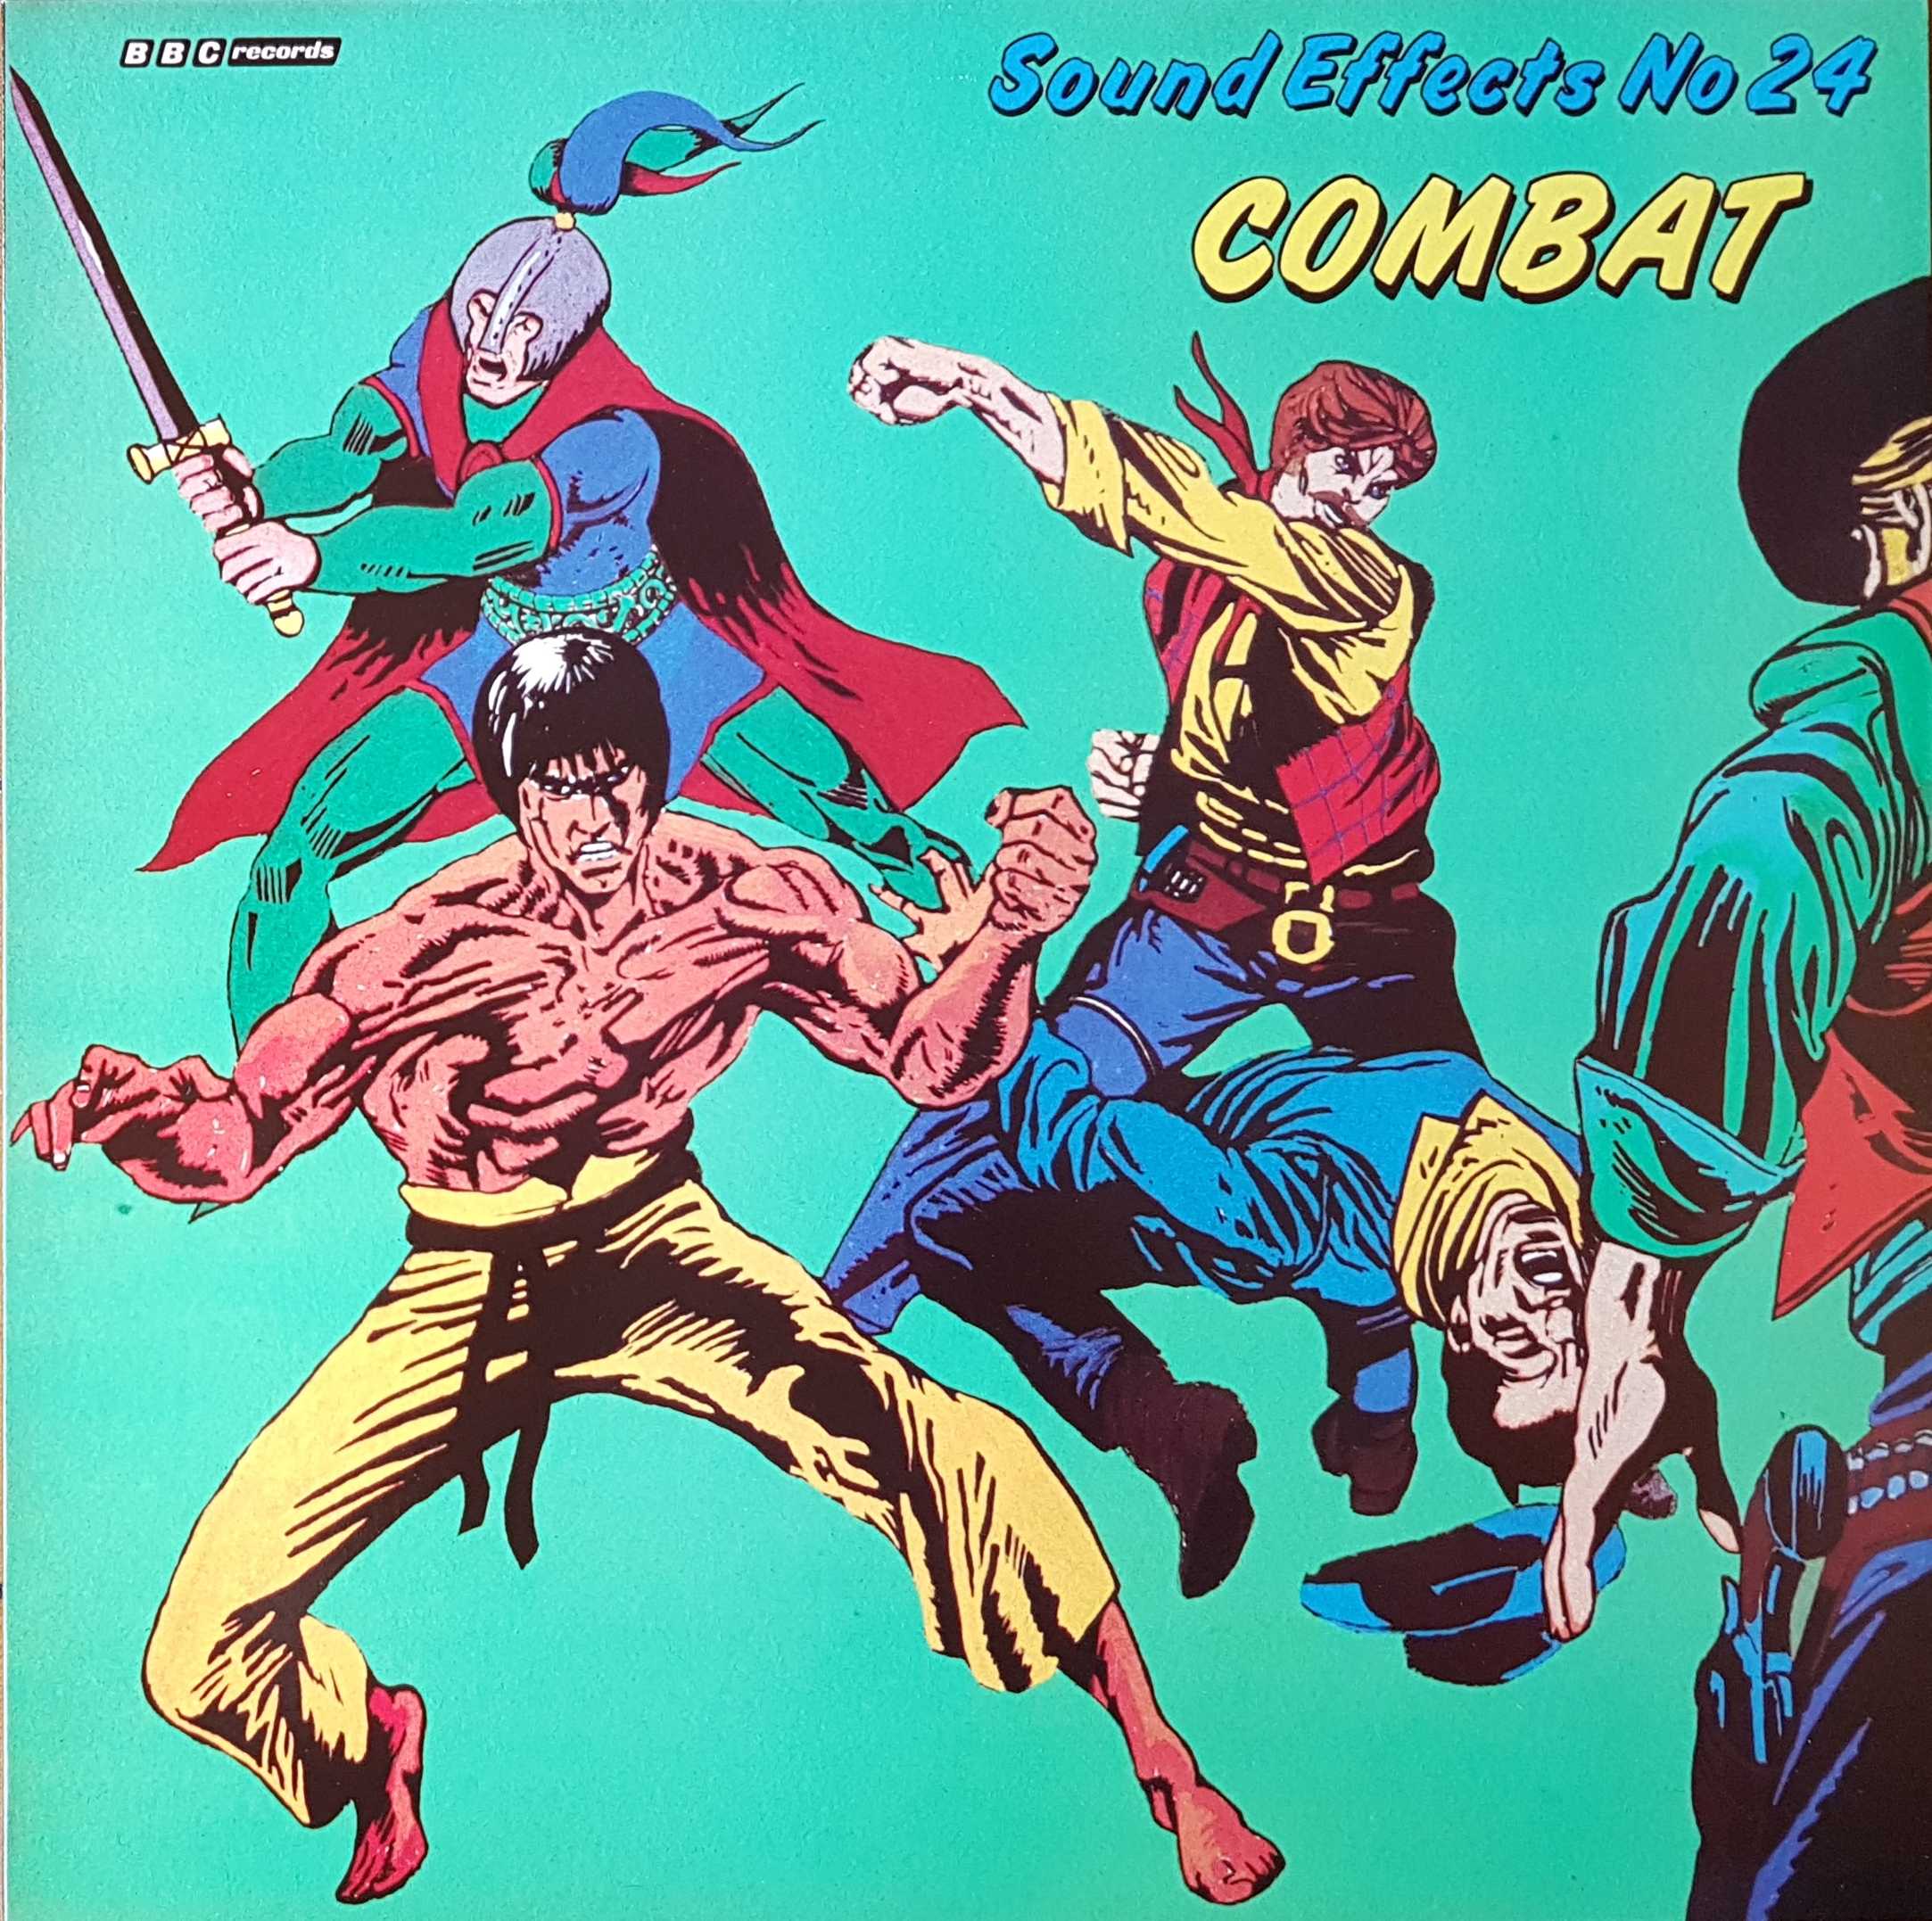 Picture of REC 383 Combat sound effects by artist Various from the BBC albums - Records and Tapes library